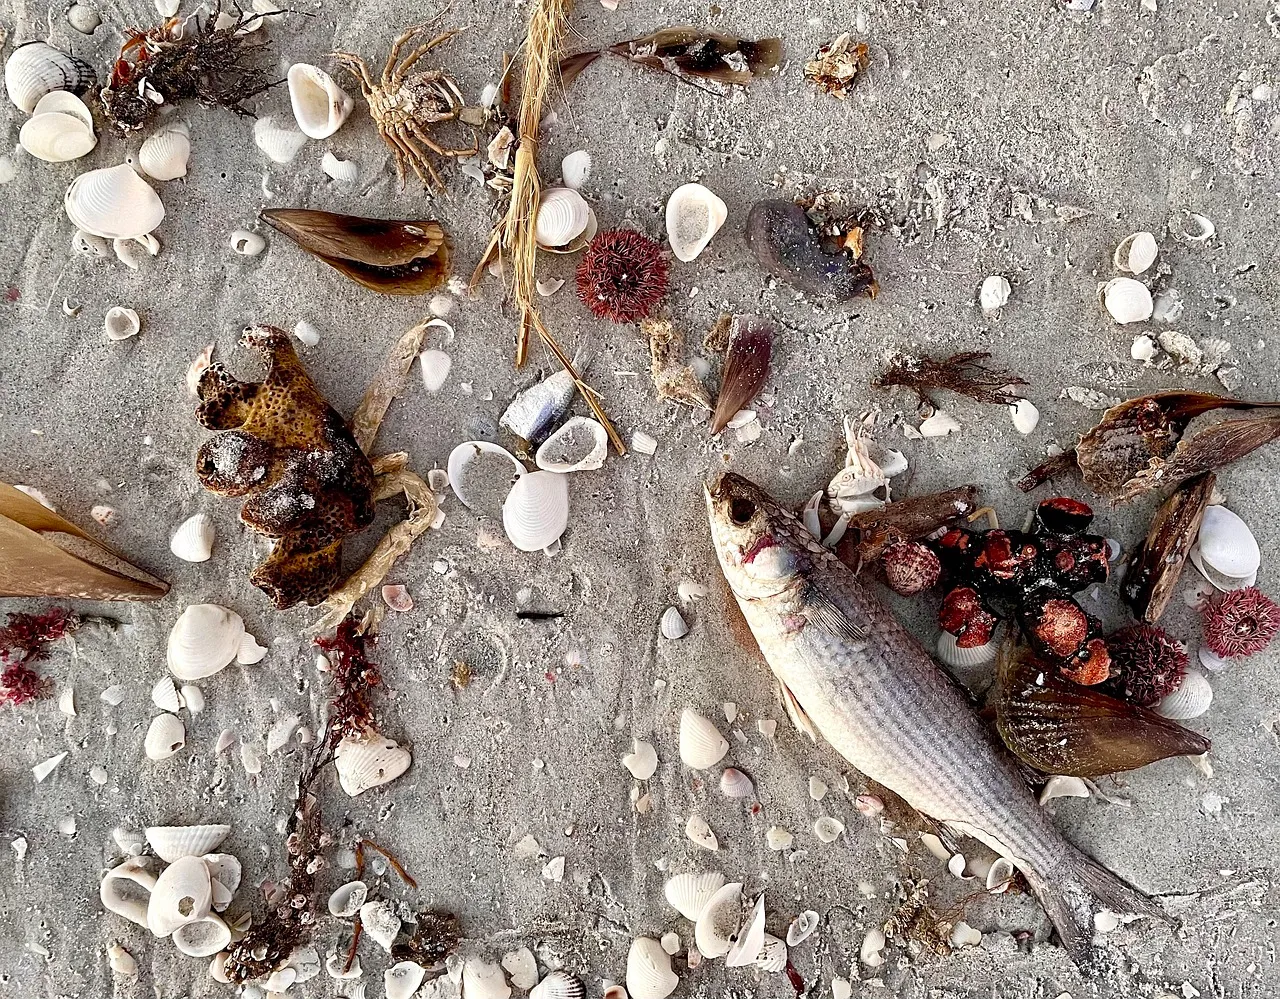 Dead fish and sea life washed ashore.